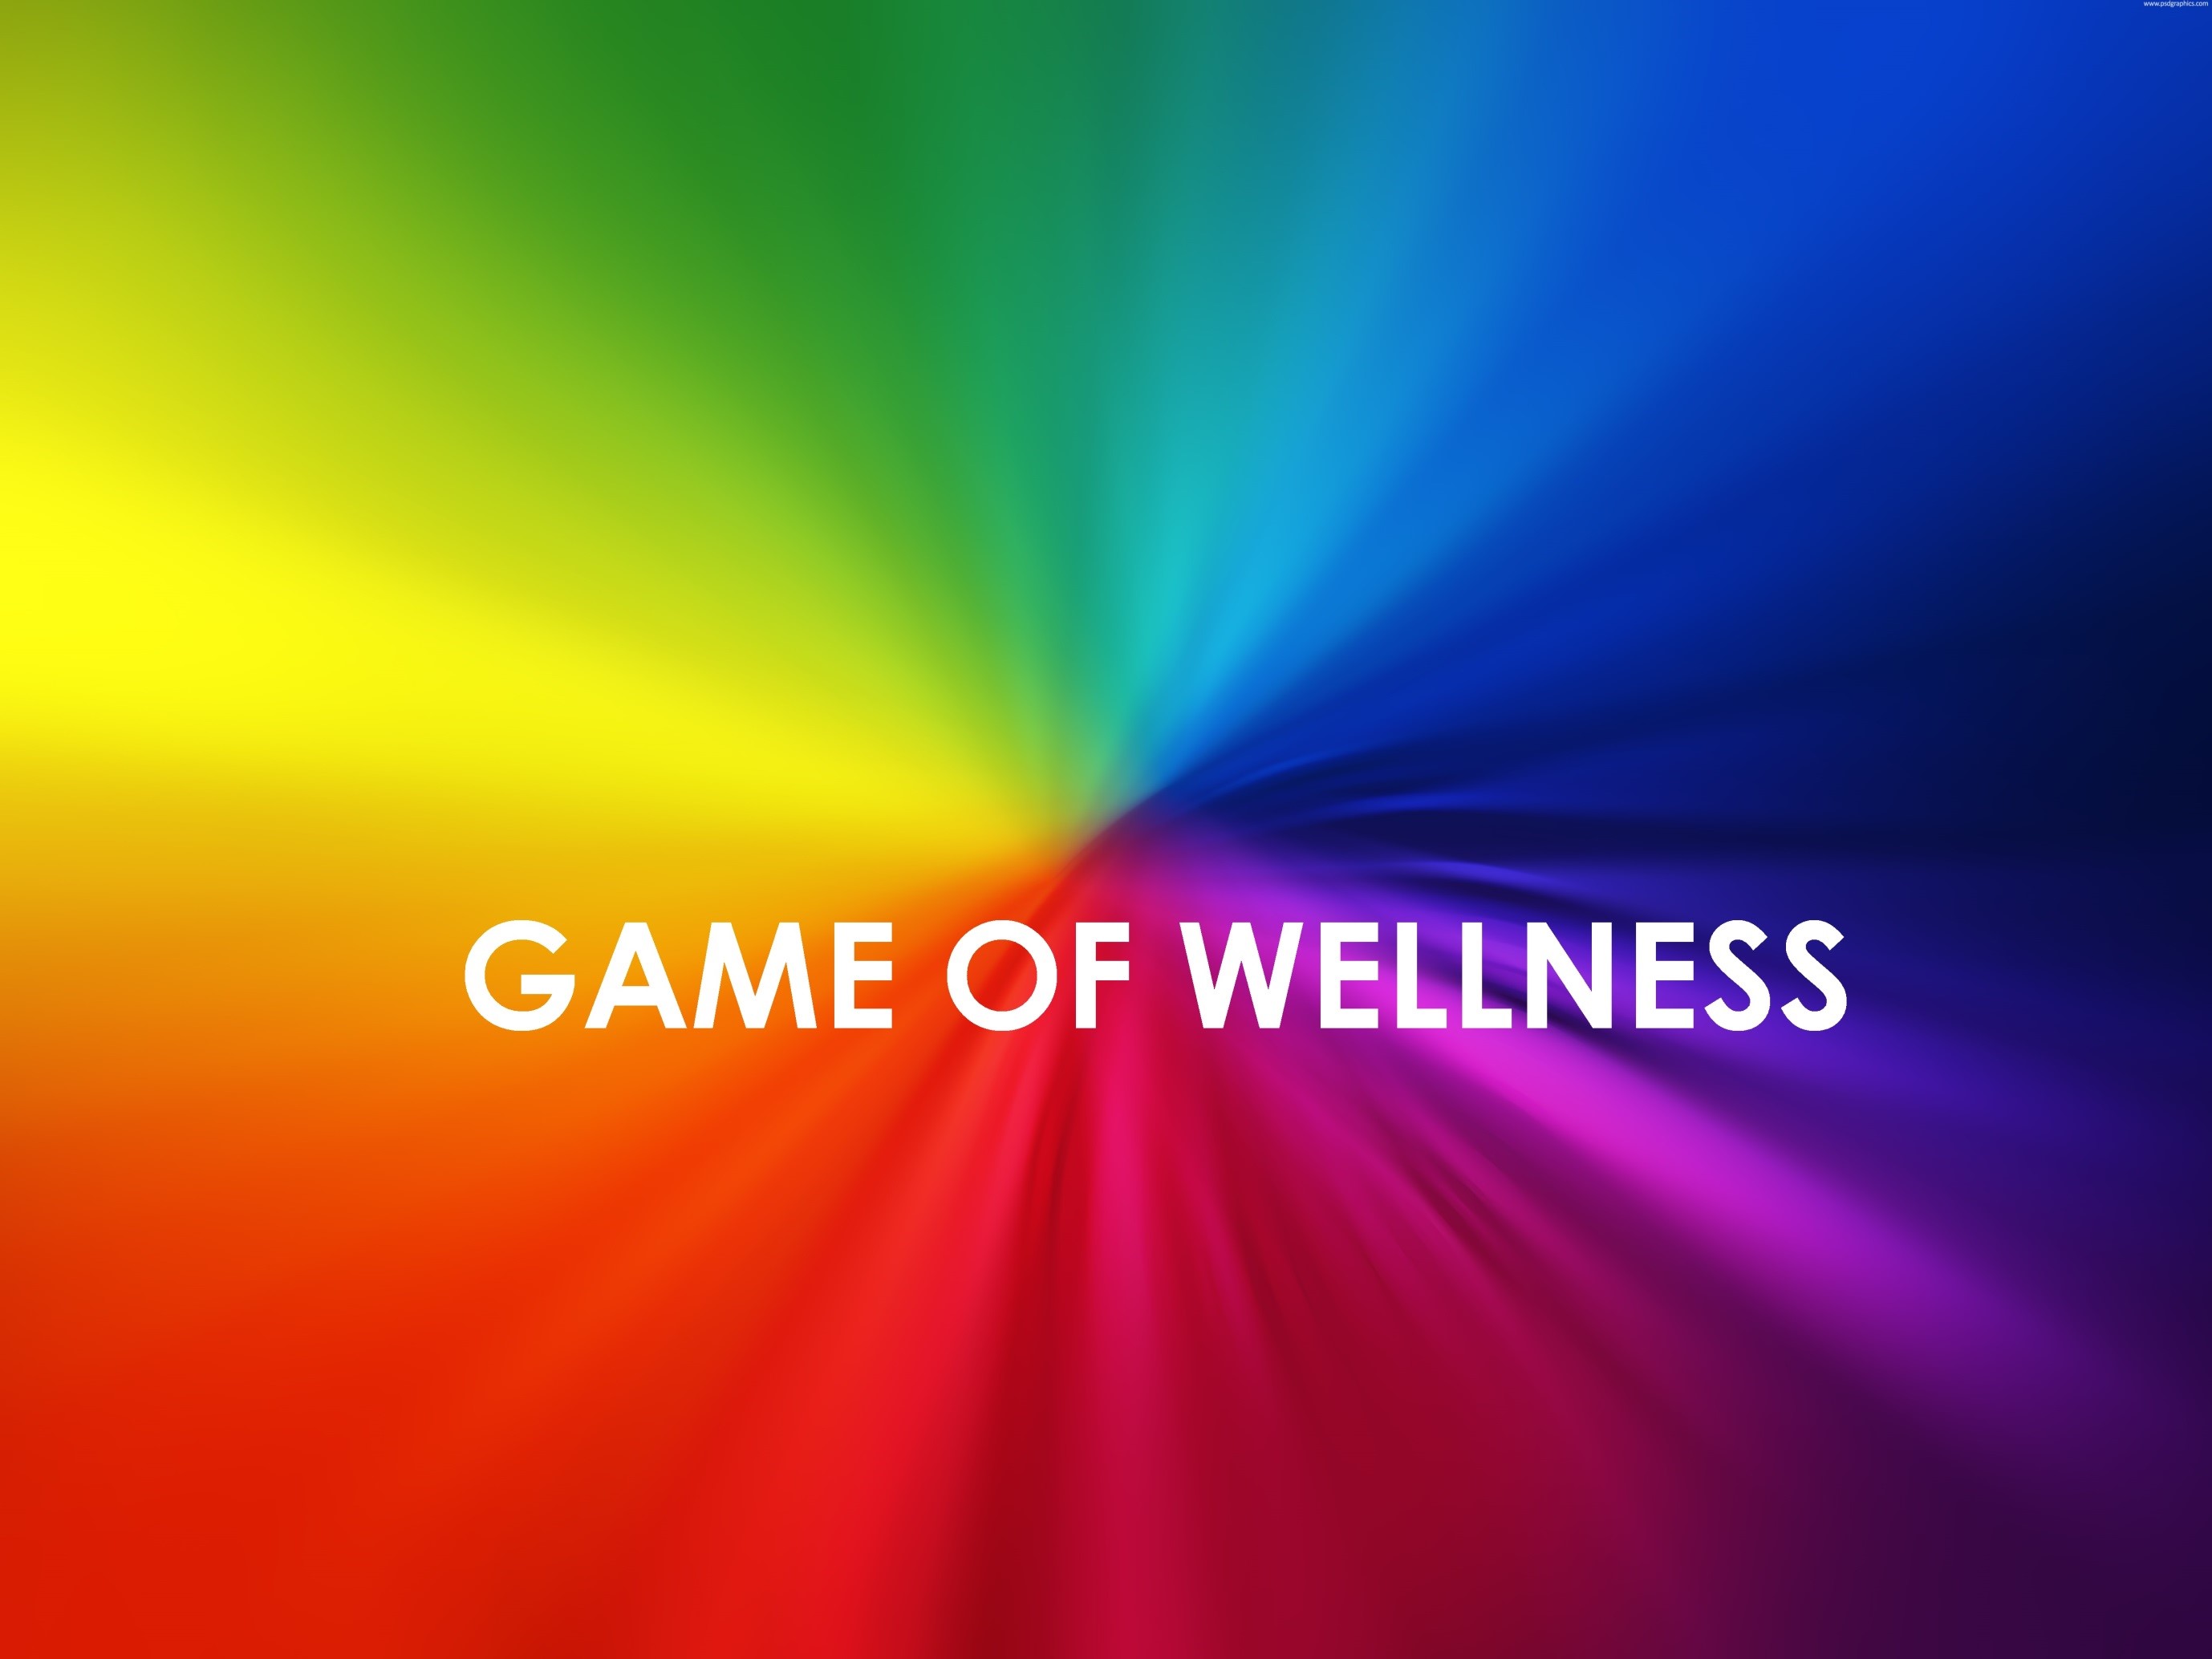 The Game of Wellness - European training course for youth workers